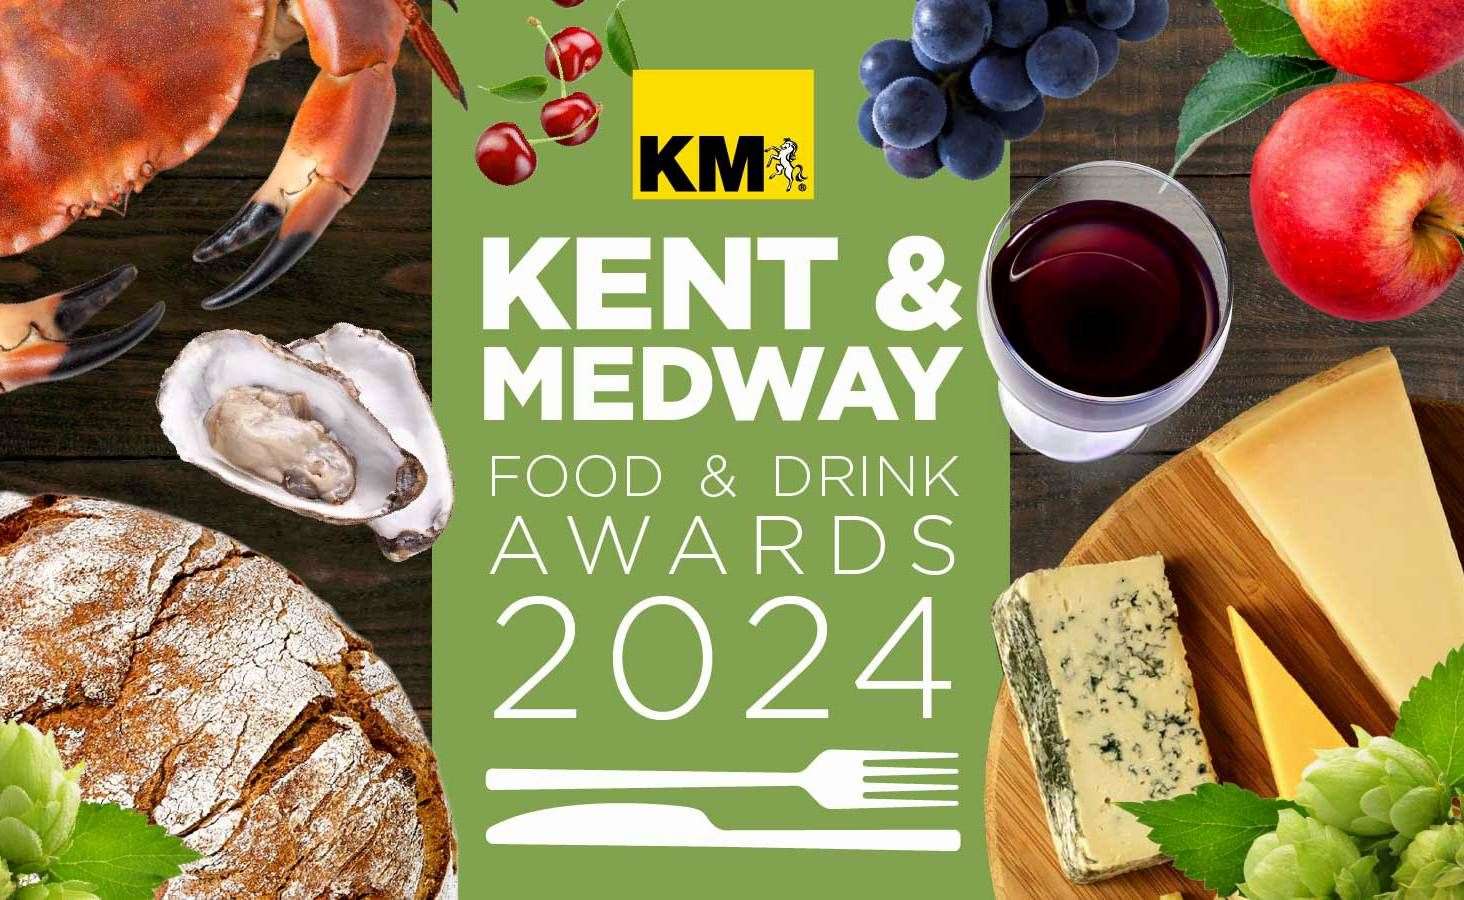 You have been voting for your favourite pubs and bars in the area for the first Kent & Medway Food & Drink Awards